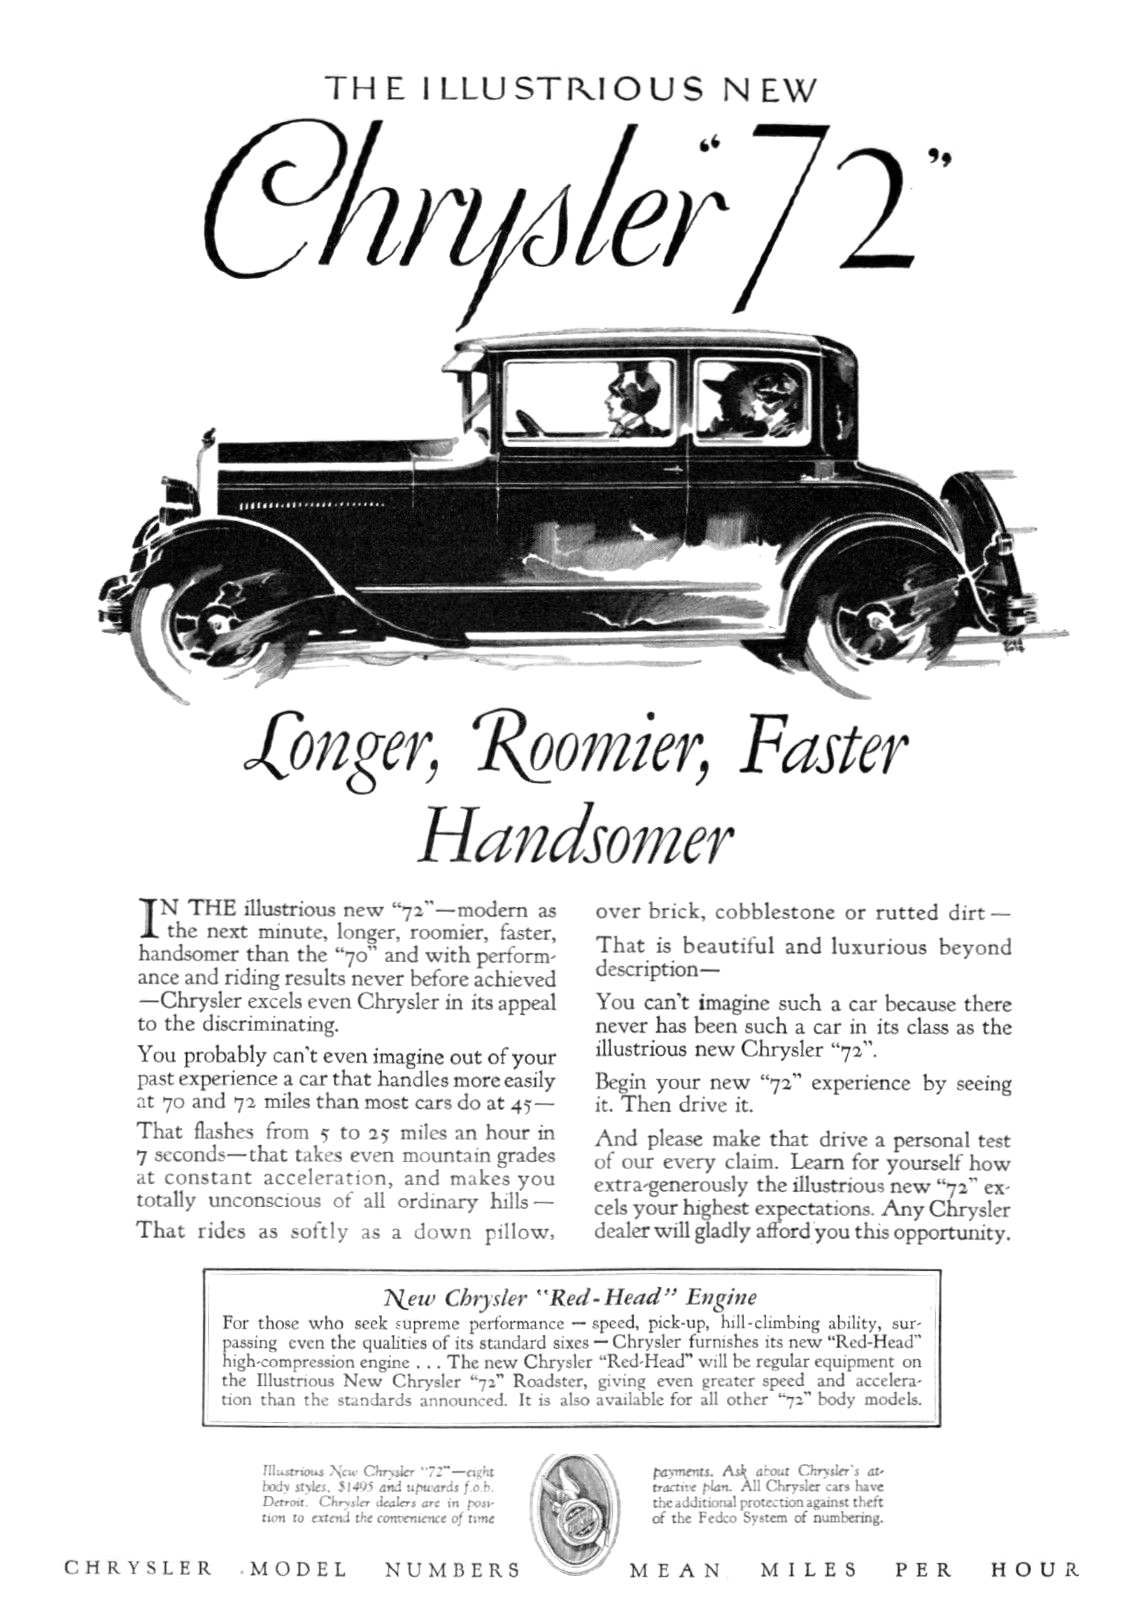 Chrysler "72" Ad (August, 1927): Longer, Roomier, Faster, Handsomer - Illustrated by Fred Cole